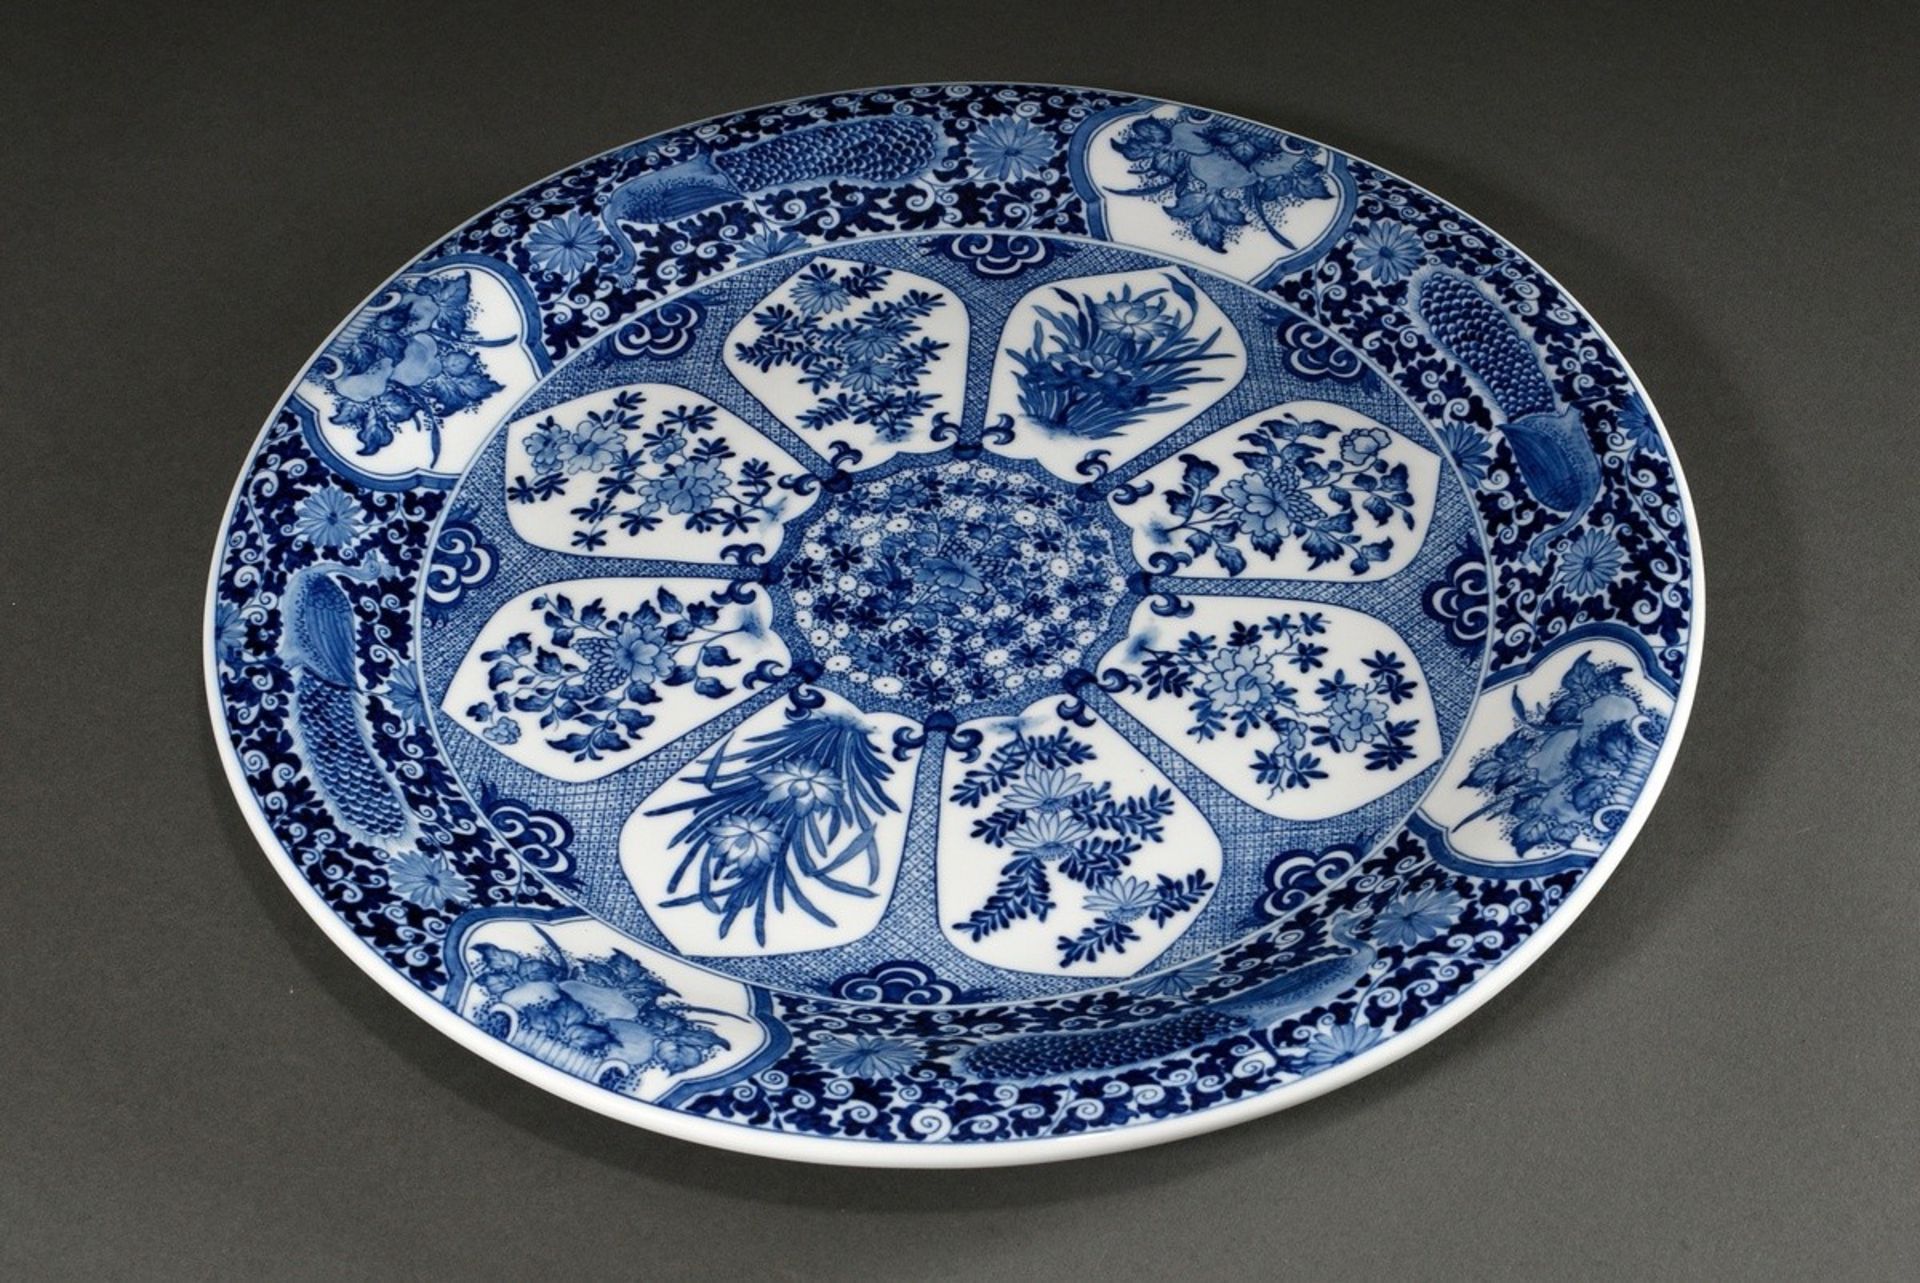 Large Meissen plate with blue painting decor after Kangxi model, 20th century, model no.: 54605, bo